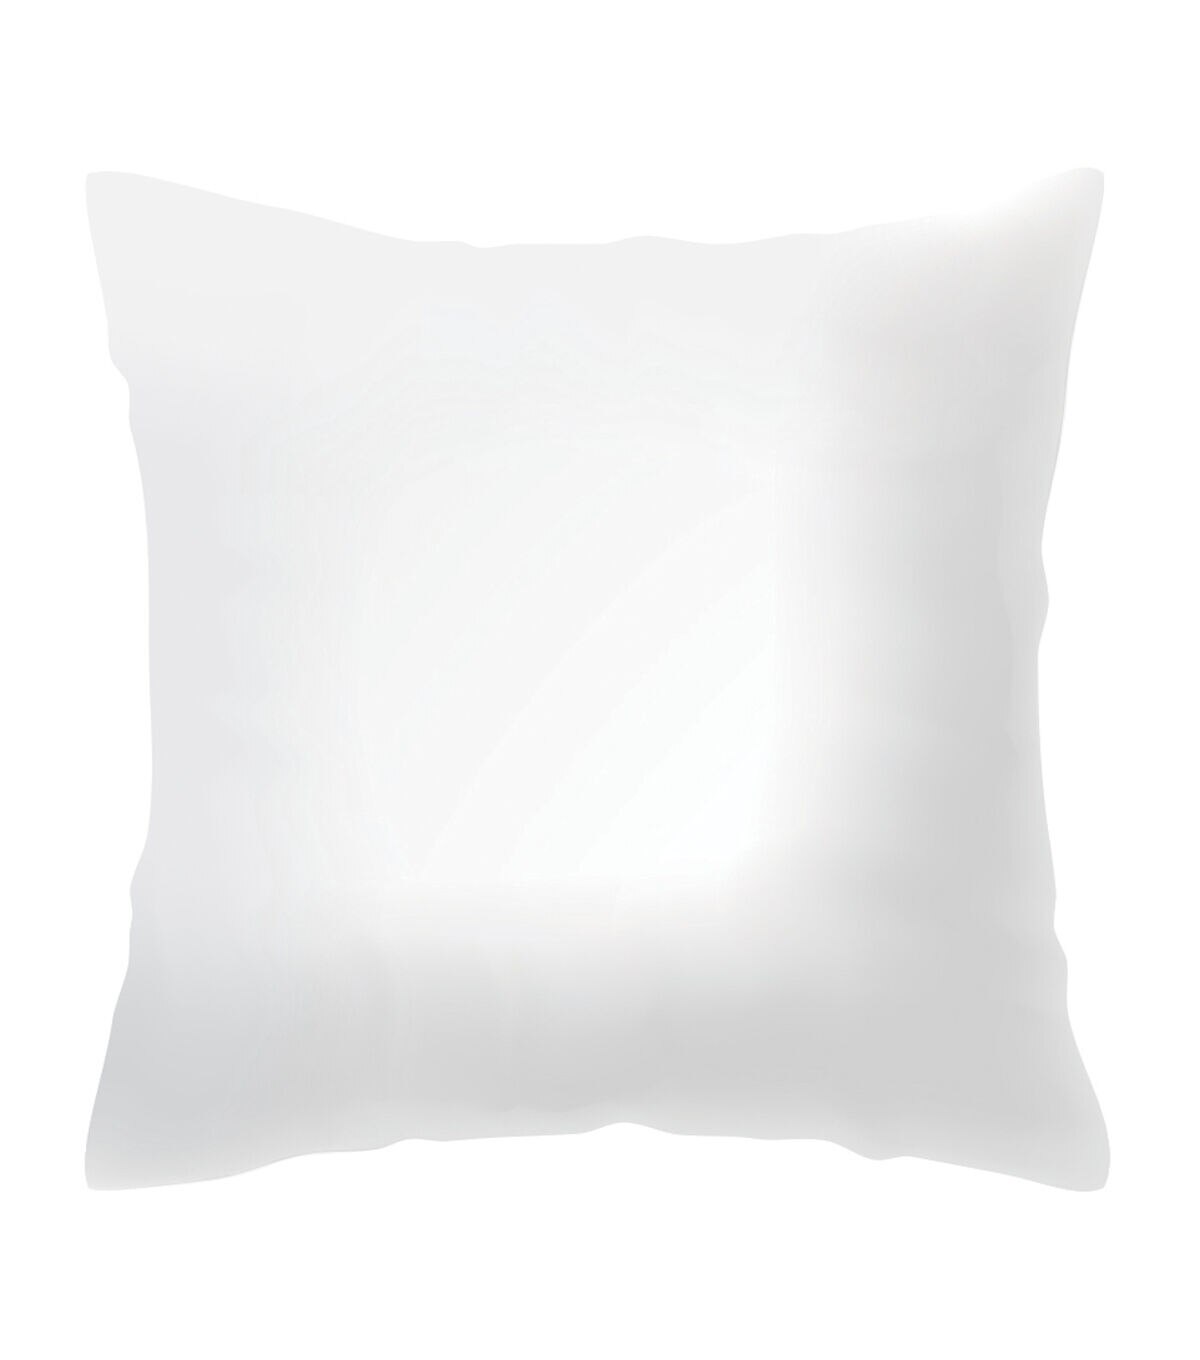 Pillow Forms \u0026 Throw Pillow Inserts and 